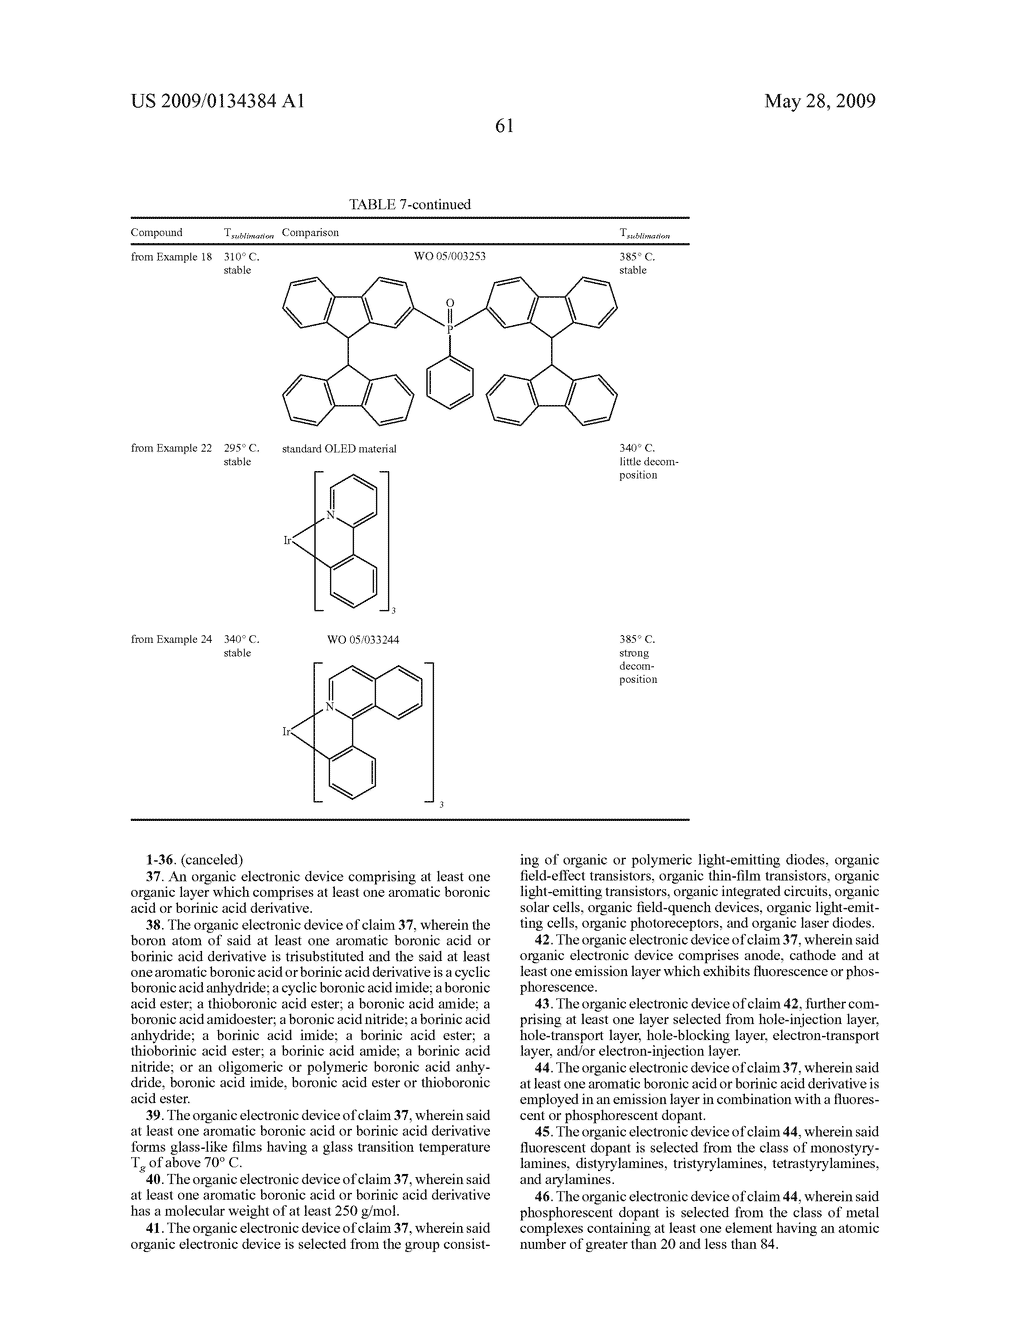 ORGANIC ELECTROLUMINESCENT DEVICE AND BORIC ACID AND BORINIC ACID DERIVATIVES USED THEREIN - diagram, schematic, and image 63